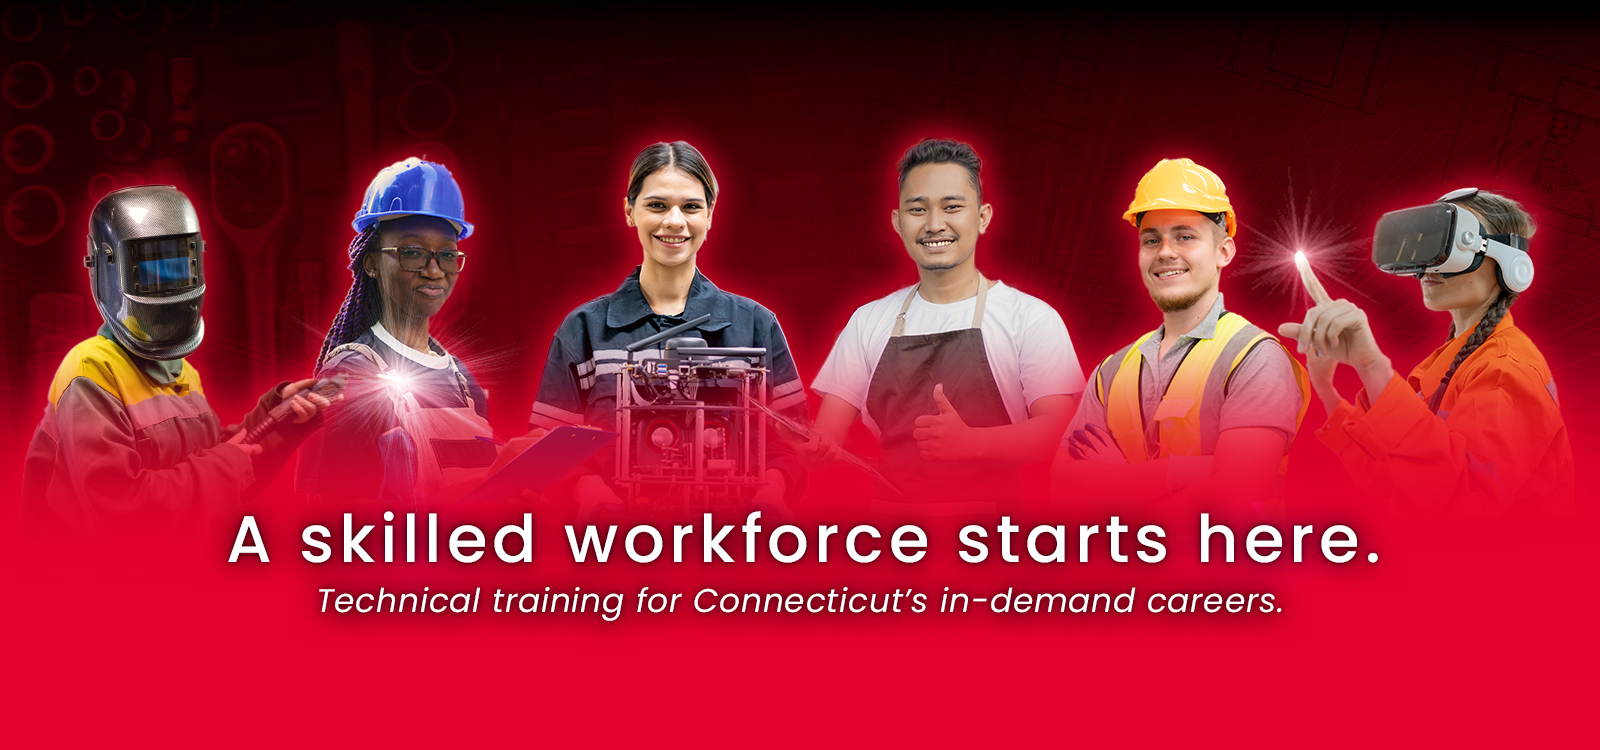 Image of six trade students with text that says "A skilled workforce starts here. Technical training for Connecticut's in-demand careers."